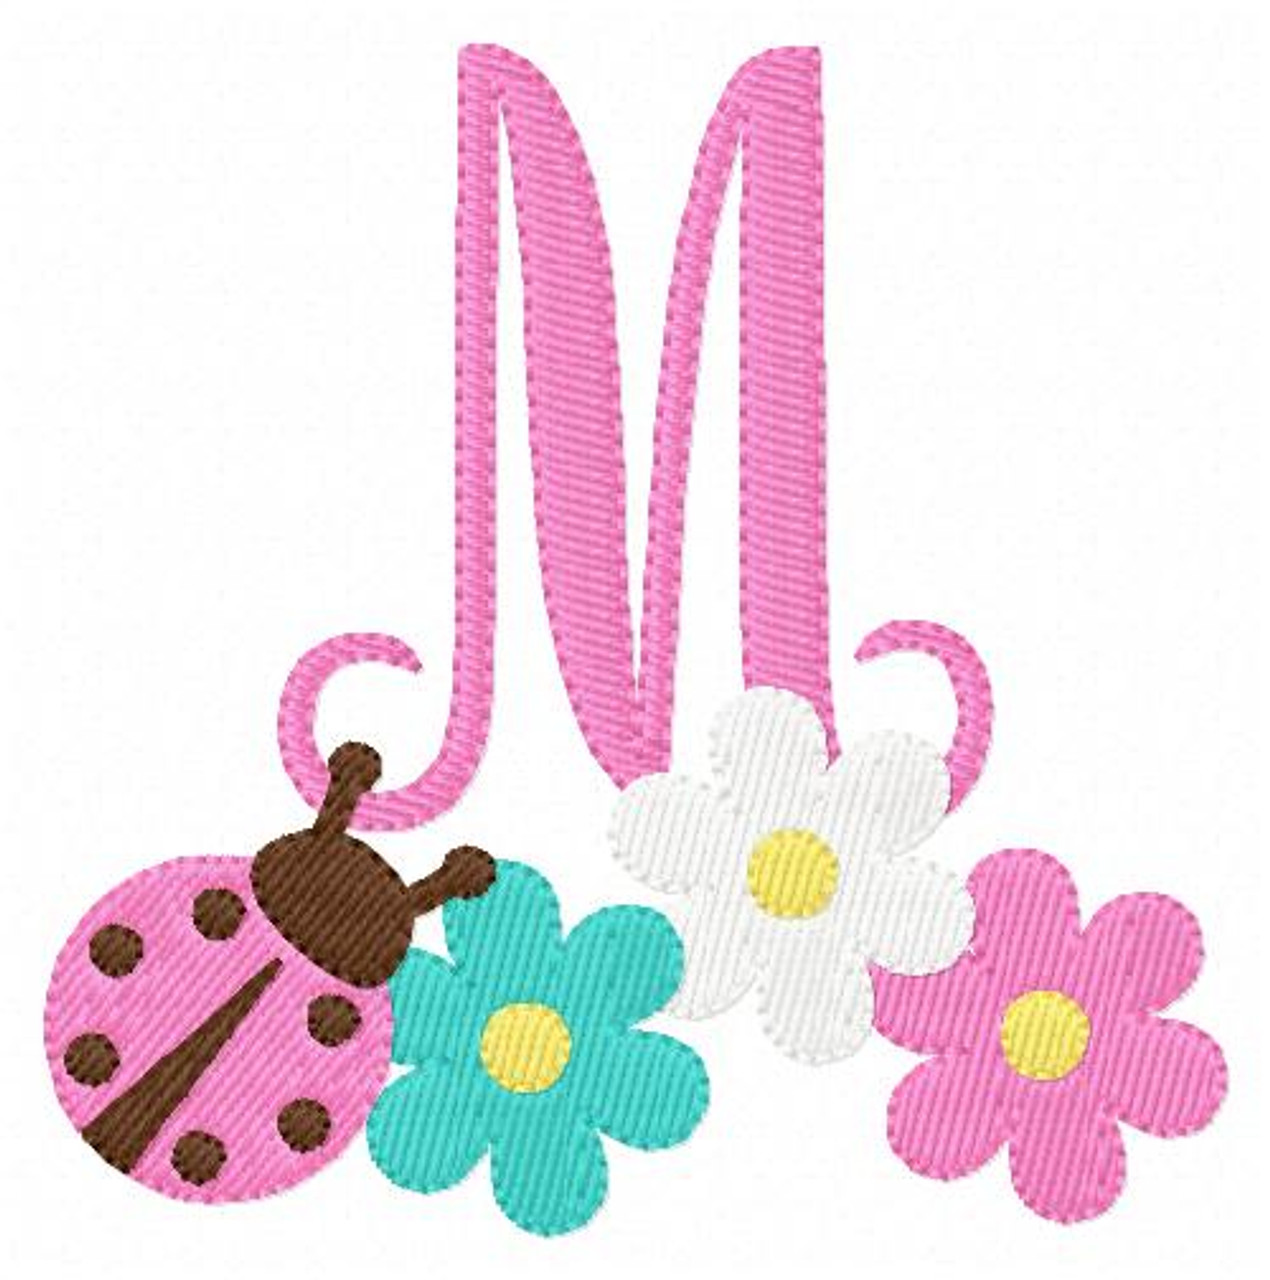 A - Monogram with flowers and butterflies Elegance in Bloom Sticker for  Sale by AysuDesign